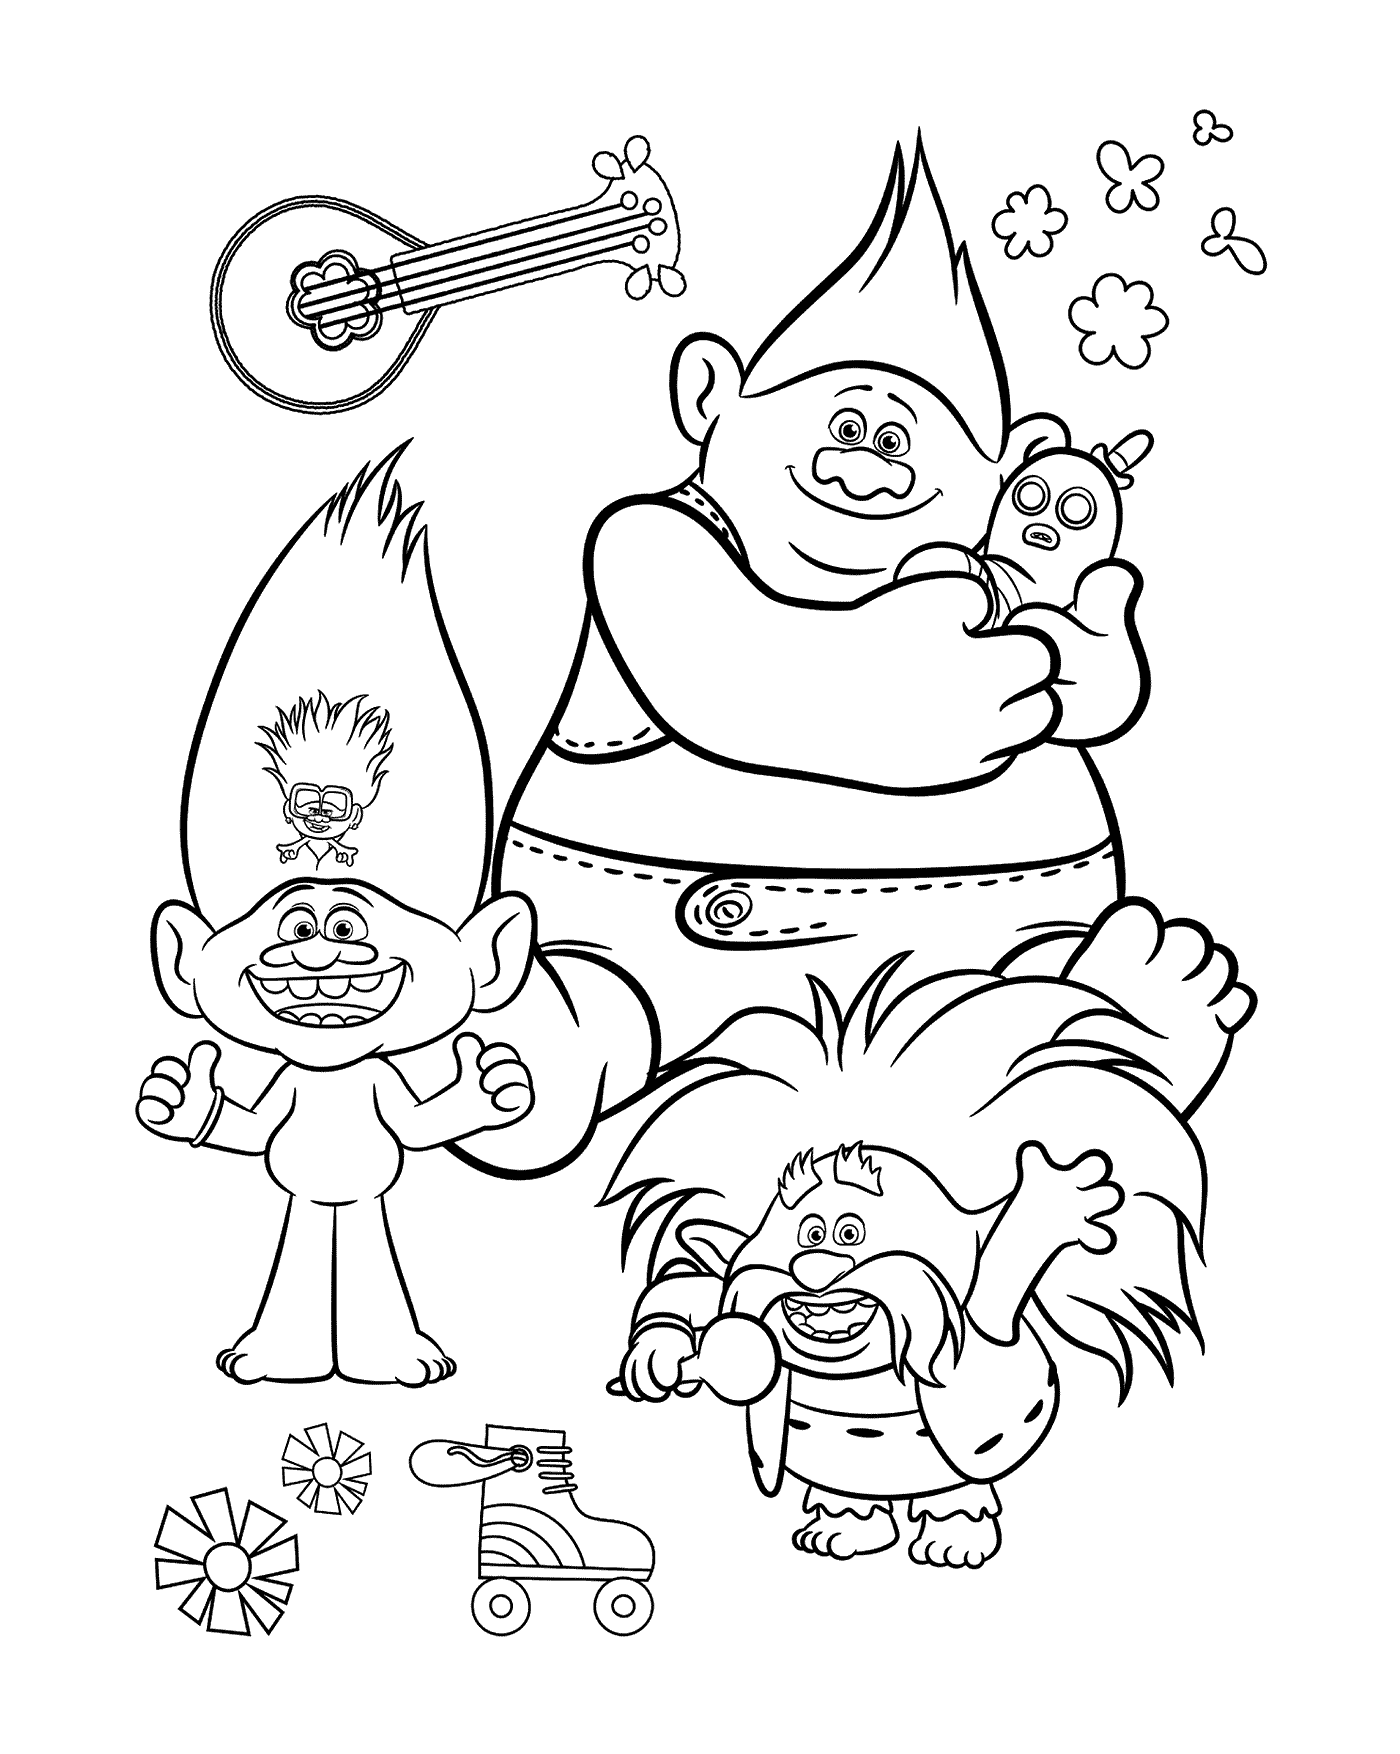 Trolls Coloring Pages: 63 Printable Drawings